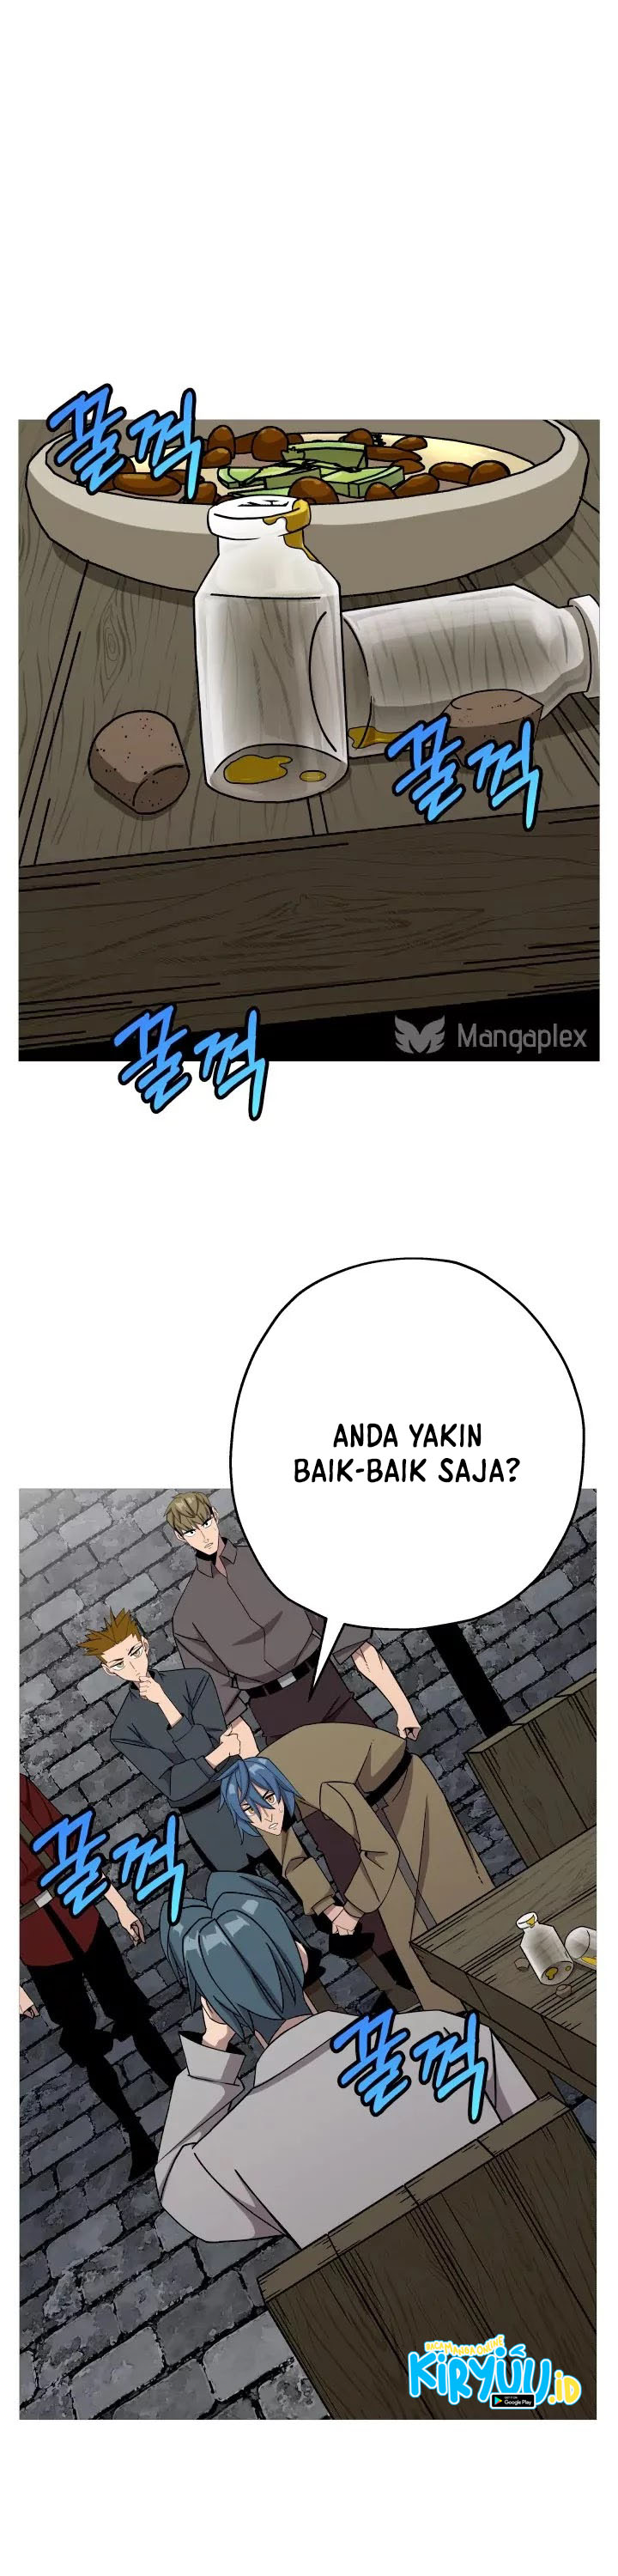 Dilarang COPAS - situs resmi www.mangacanblog.com - Komik the story of a low rank soldier becoming a monarch 075 - chapter 75 76 Indonesia the story of a low rank soldier becoming a monarch 075 - chapter 75 Terbaru 1|Baca Manga Komik Indonesia|Mangacan